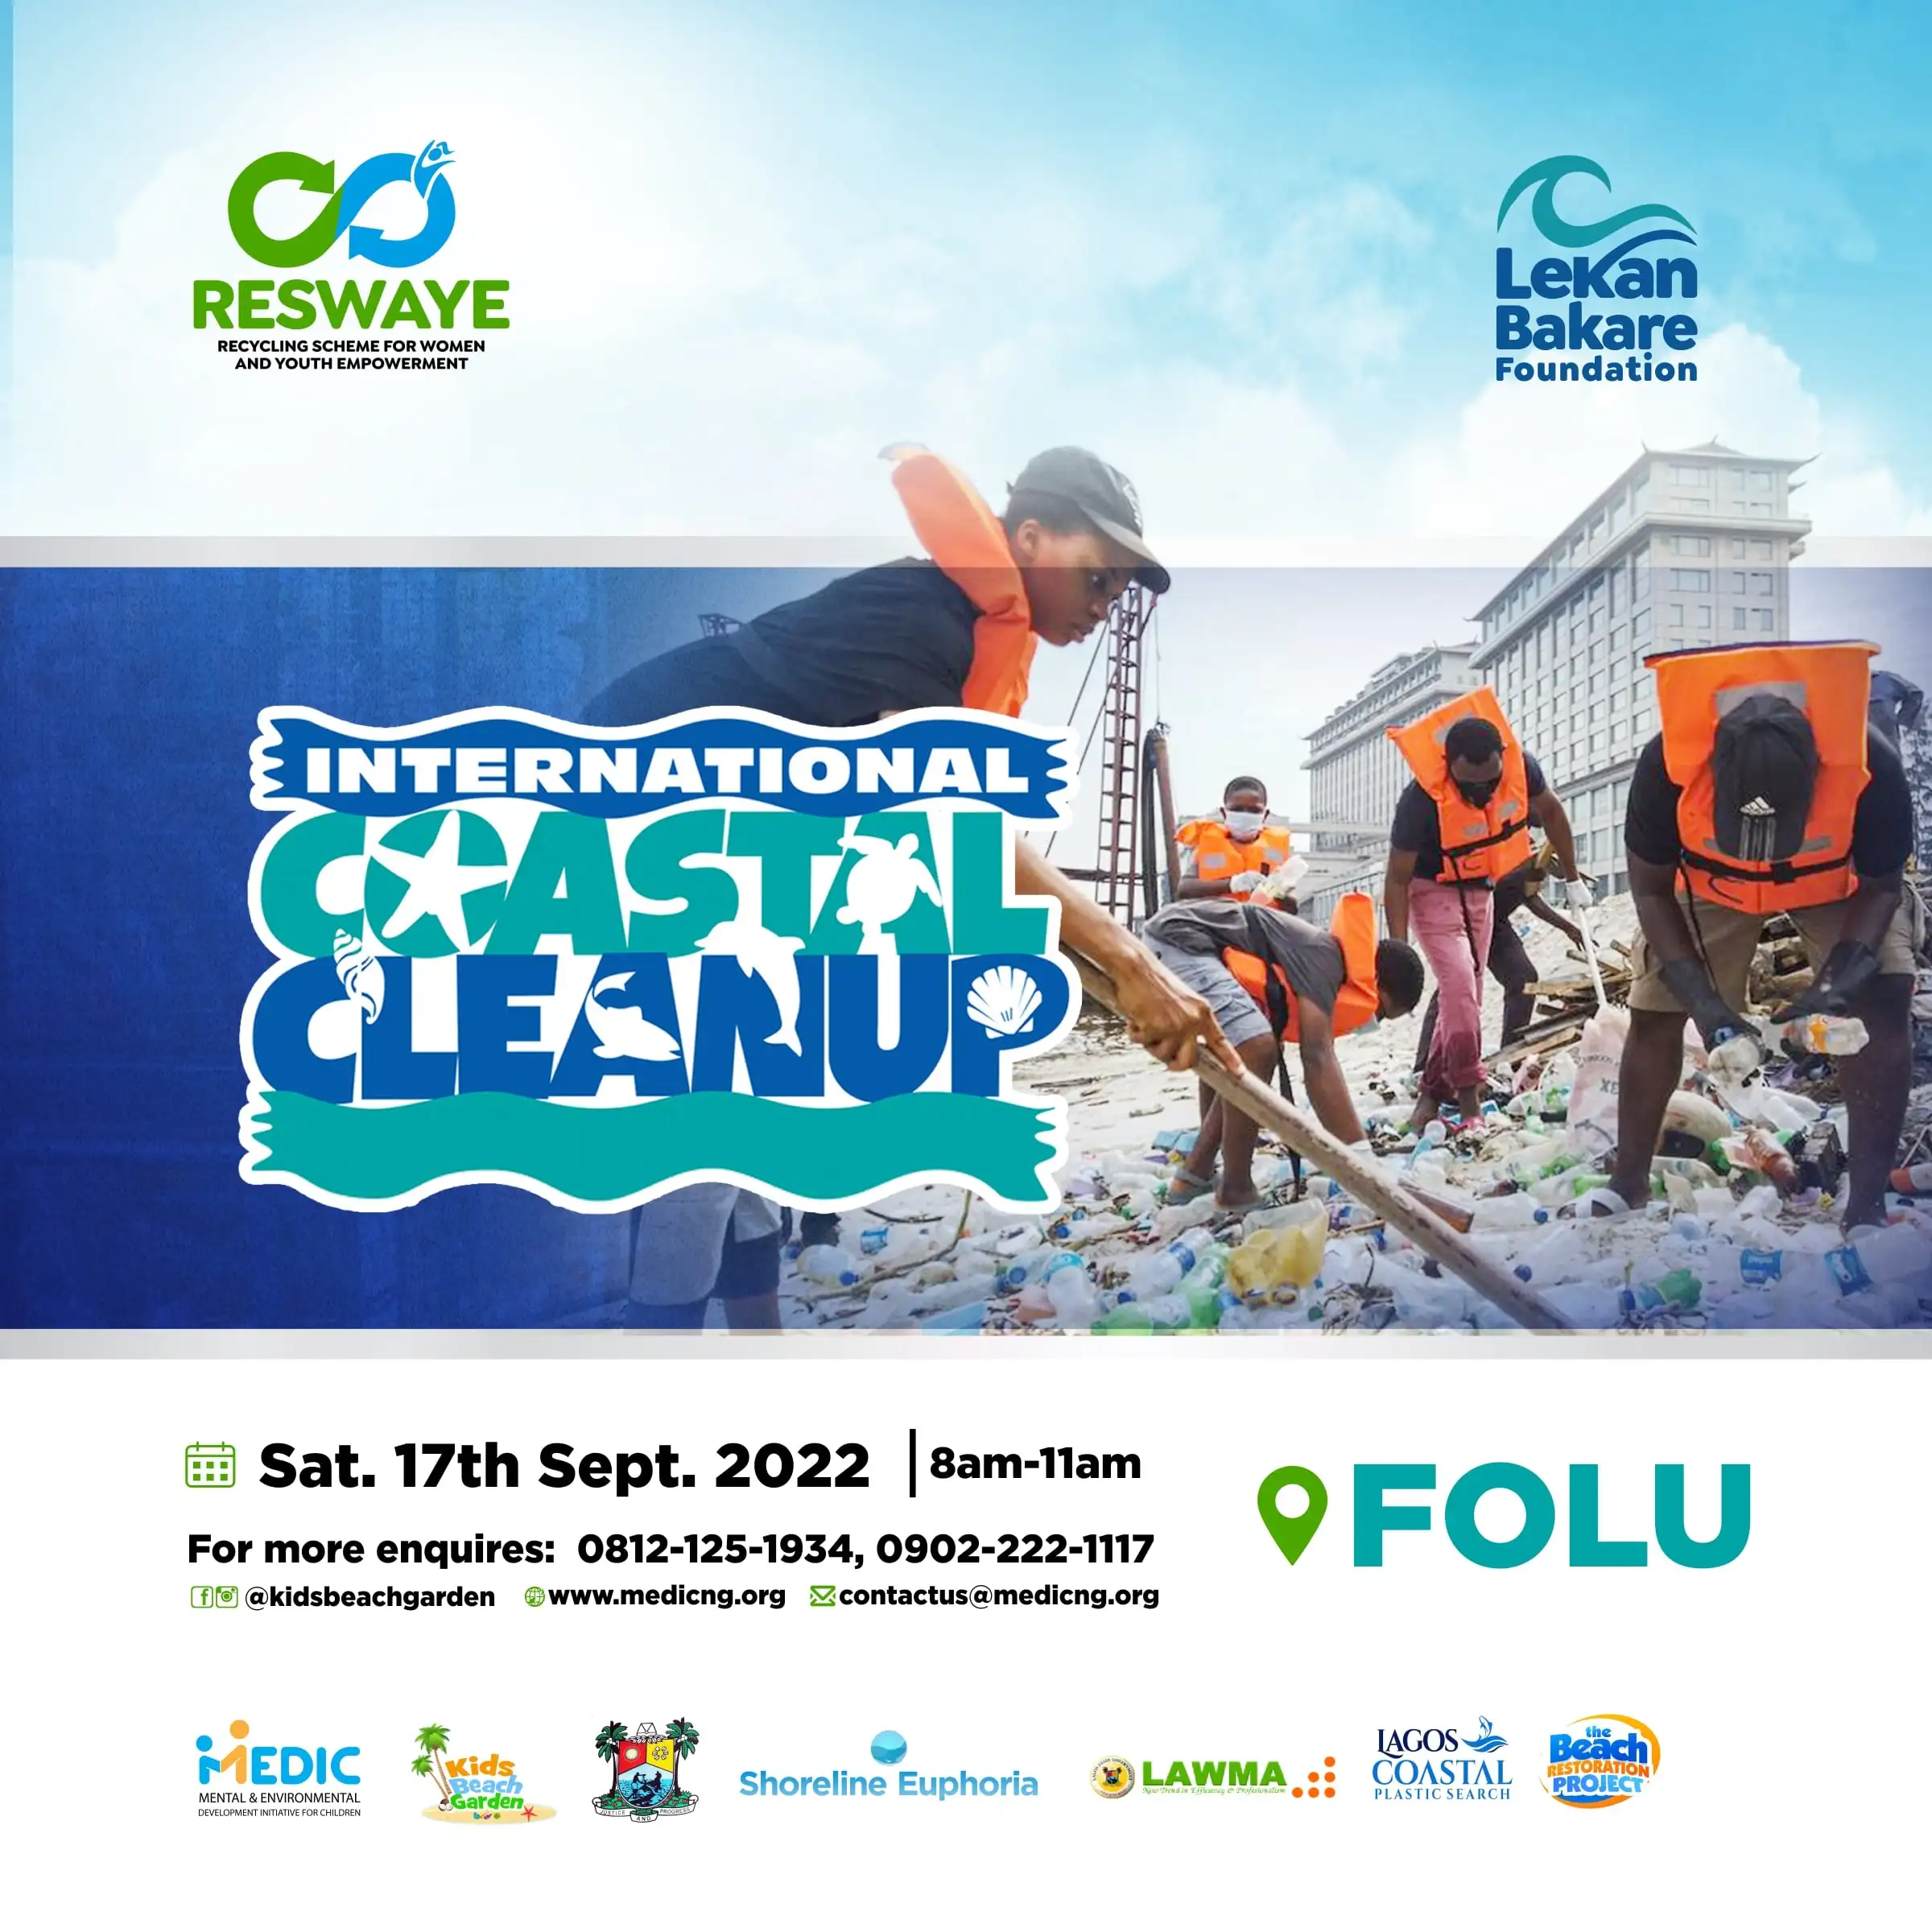 The International Coastal Cleanup Day (ICC)